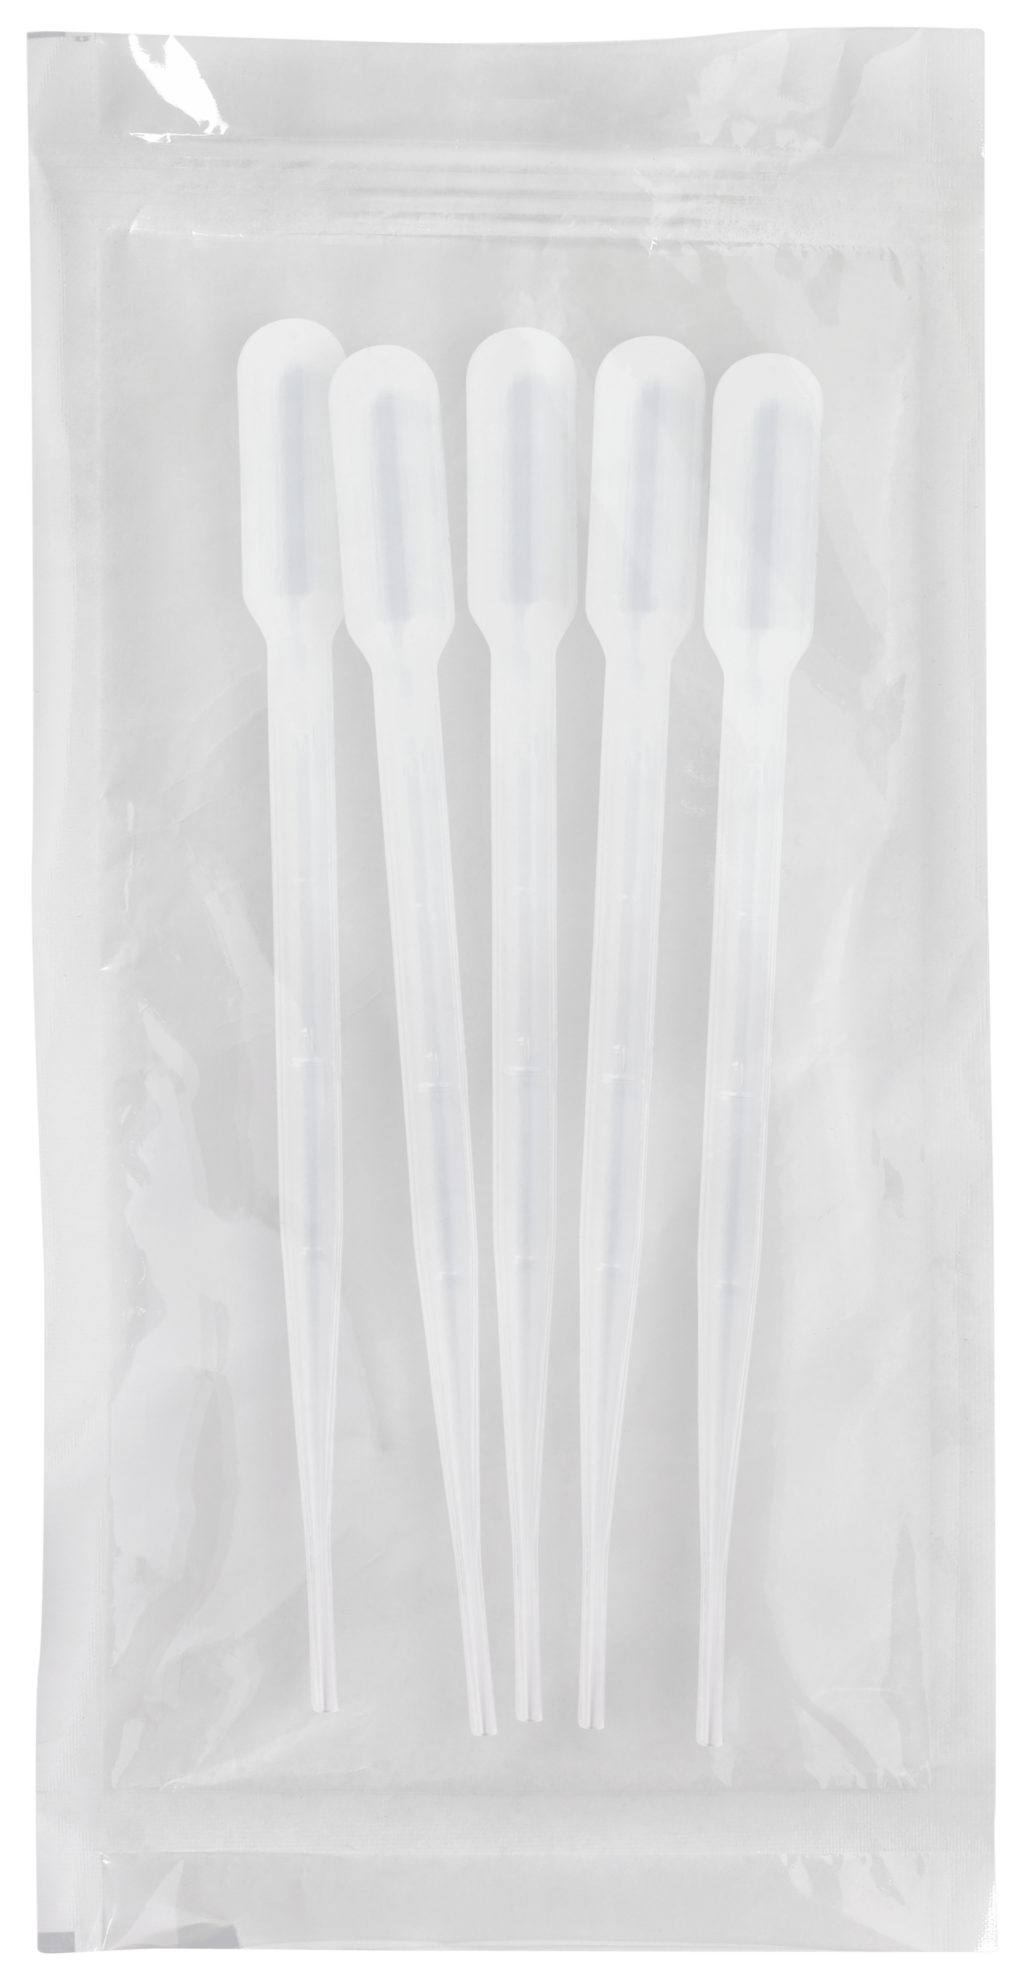 Disposable Transfer Pipet 212CS05 Transfer Pipet for Blood Bank Grad. Up to 2 mL at 0.5 mL Intervals - 5 per Peel Pouch, Sterile